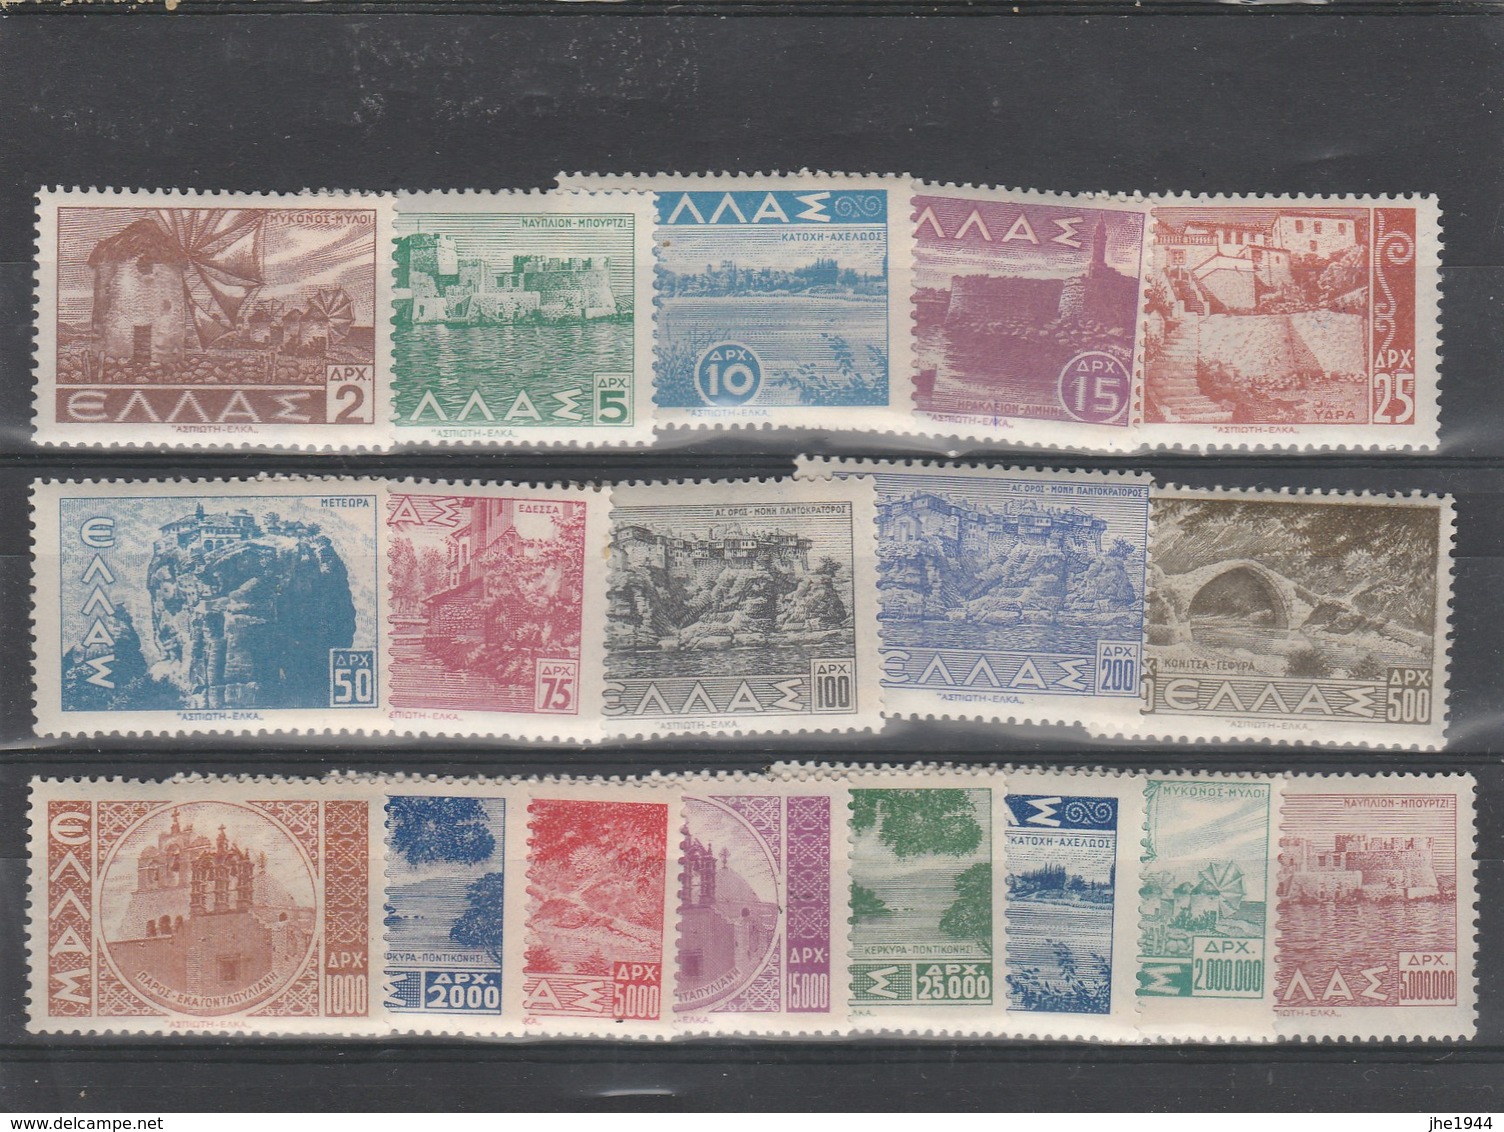 Grece N° 462 à 479* Serie Courante Complete Soit 18 Timbres - Unused Stamps